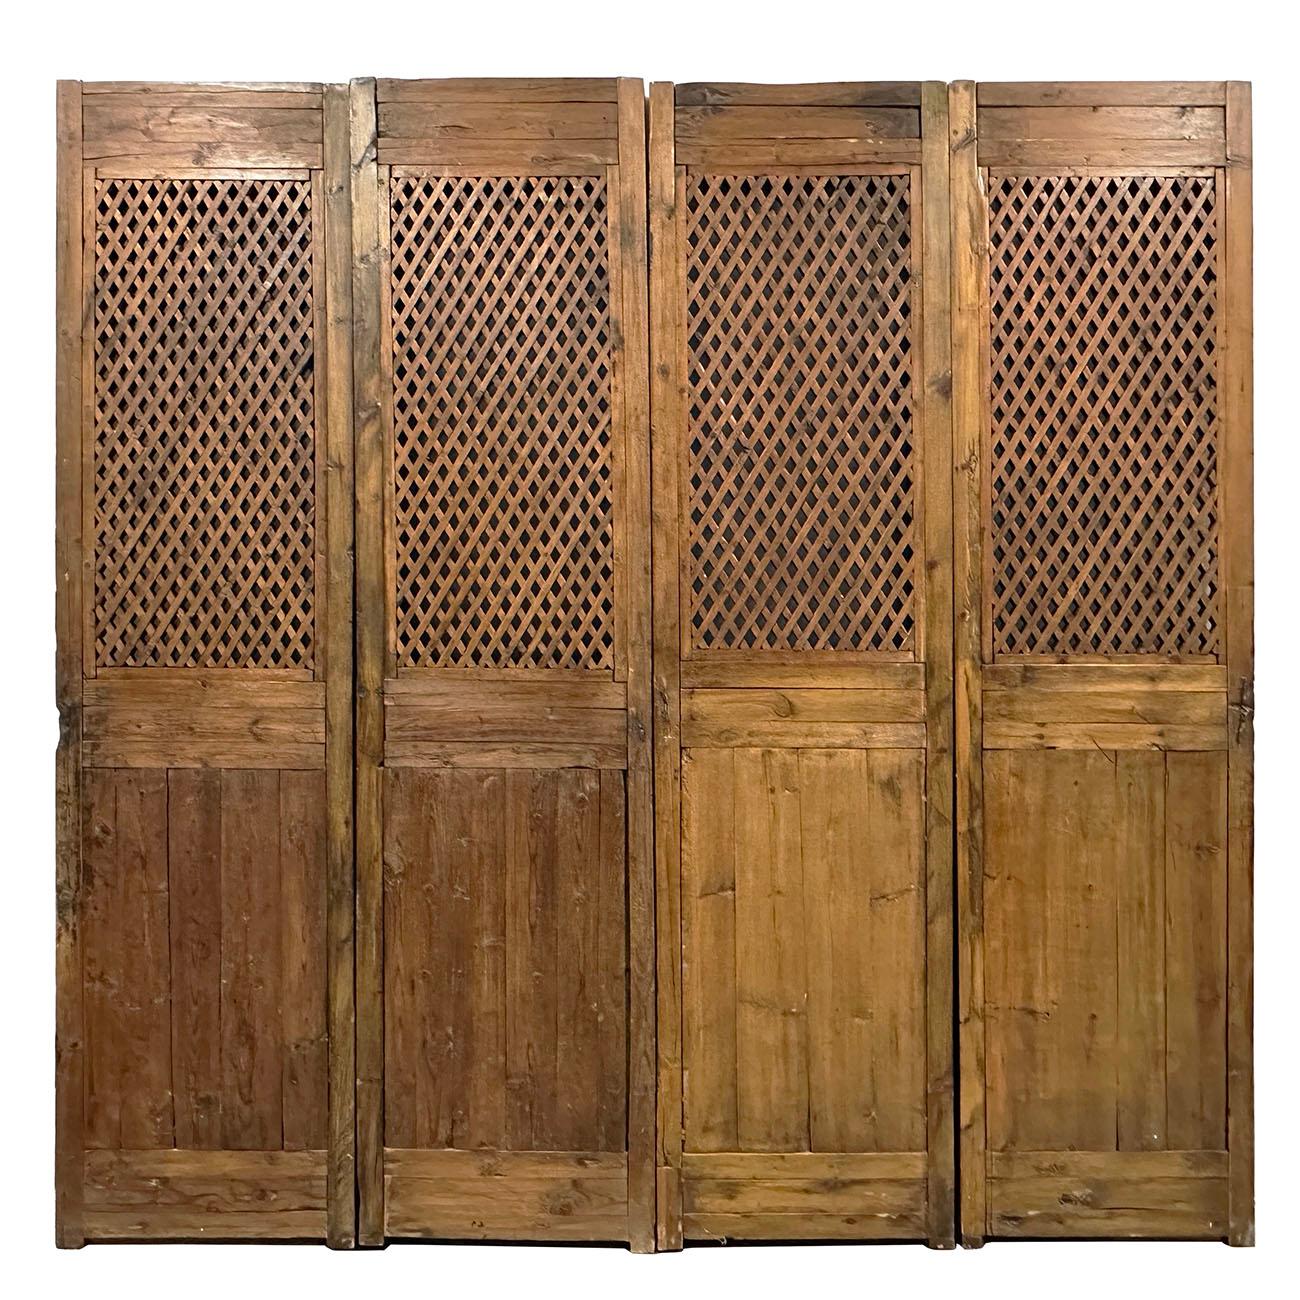 Late 19th Century Antique Chinese Hand Made 4 Panels Wooden Screen/Room Divider 5